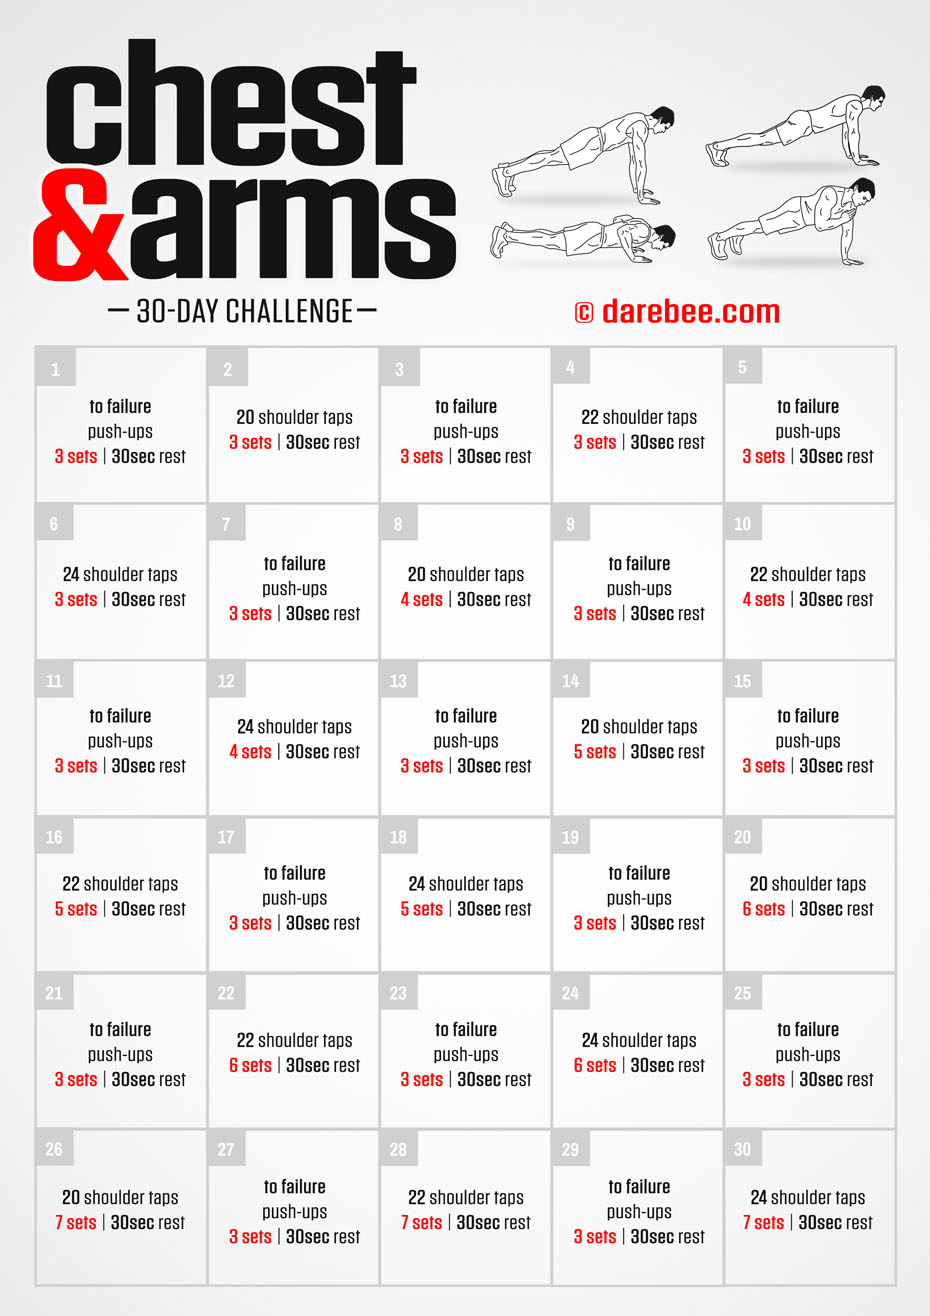 Arms 360 Workout Upper body proportional strength from Darebee